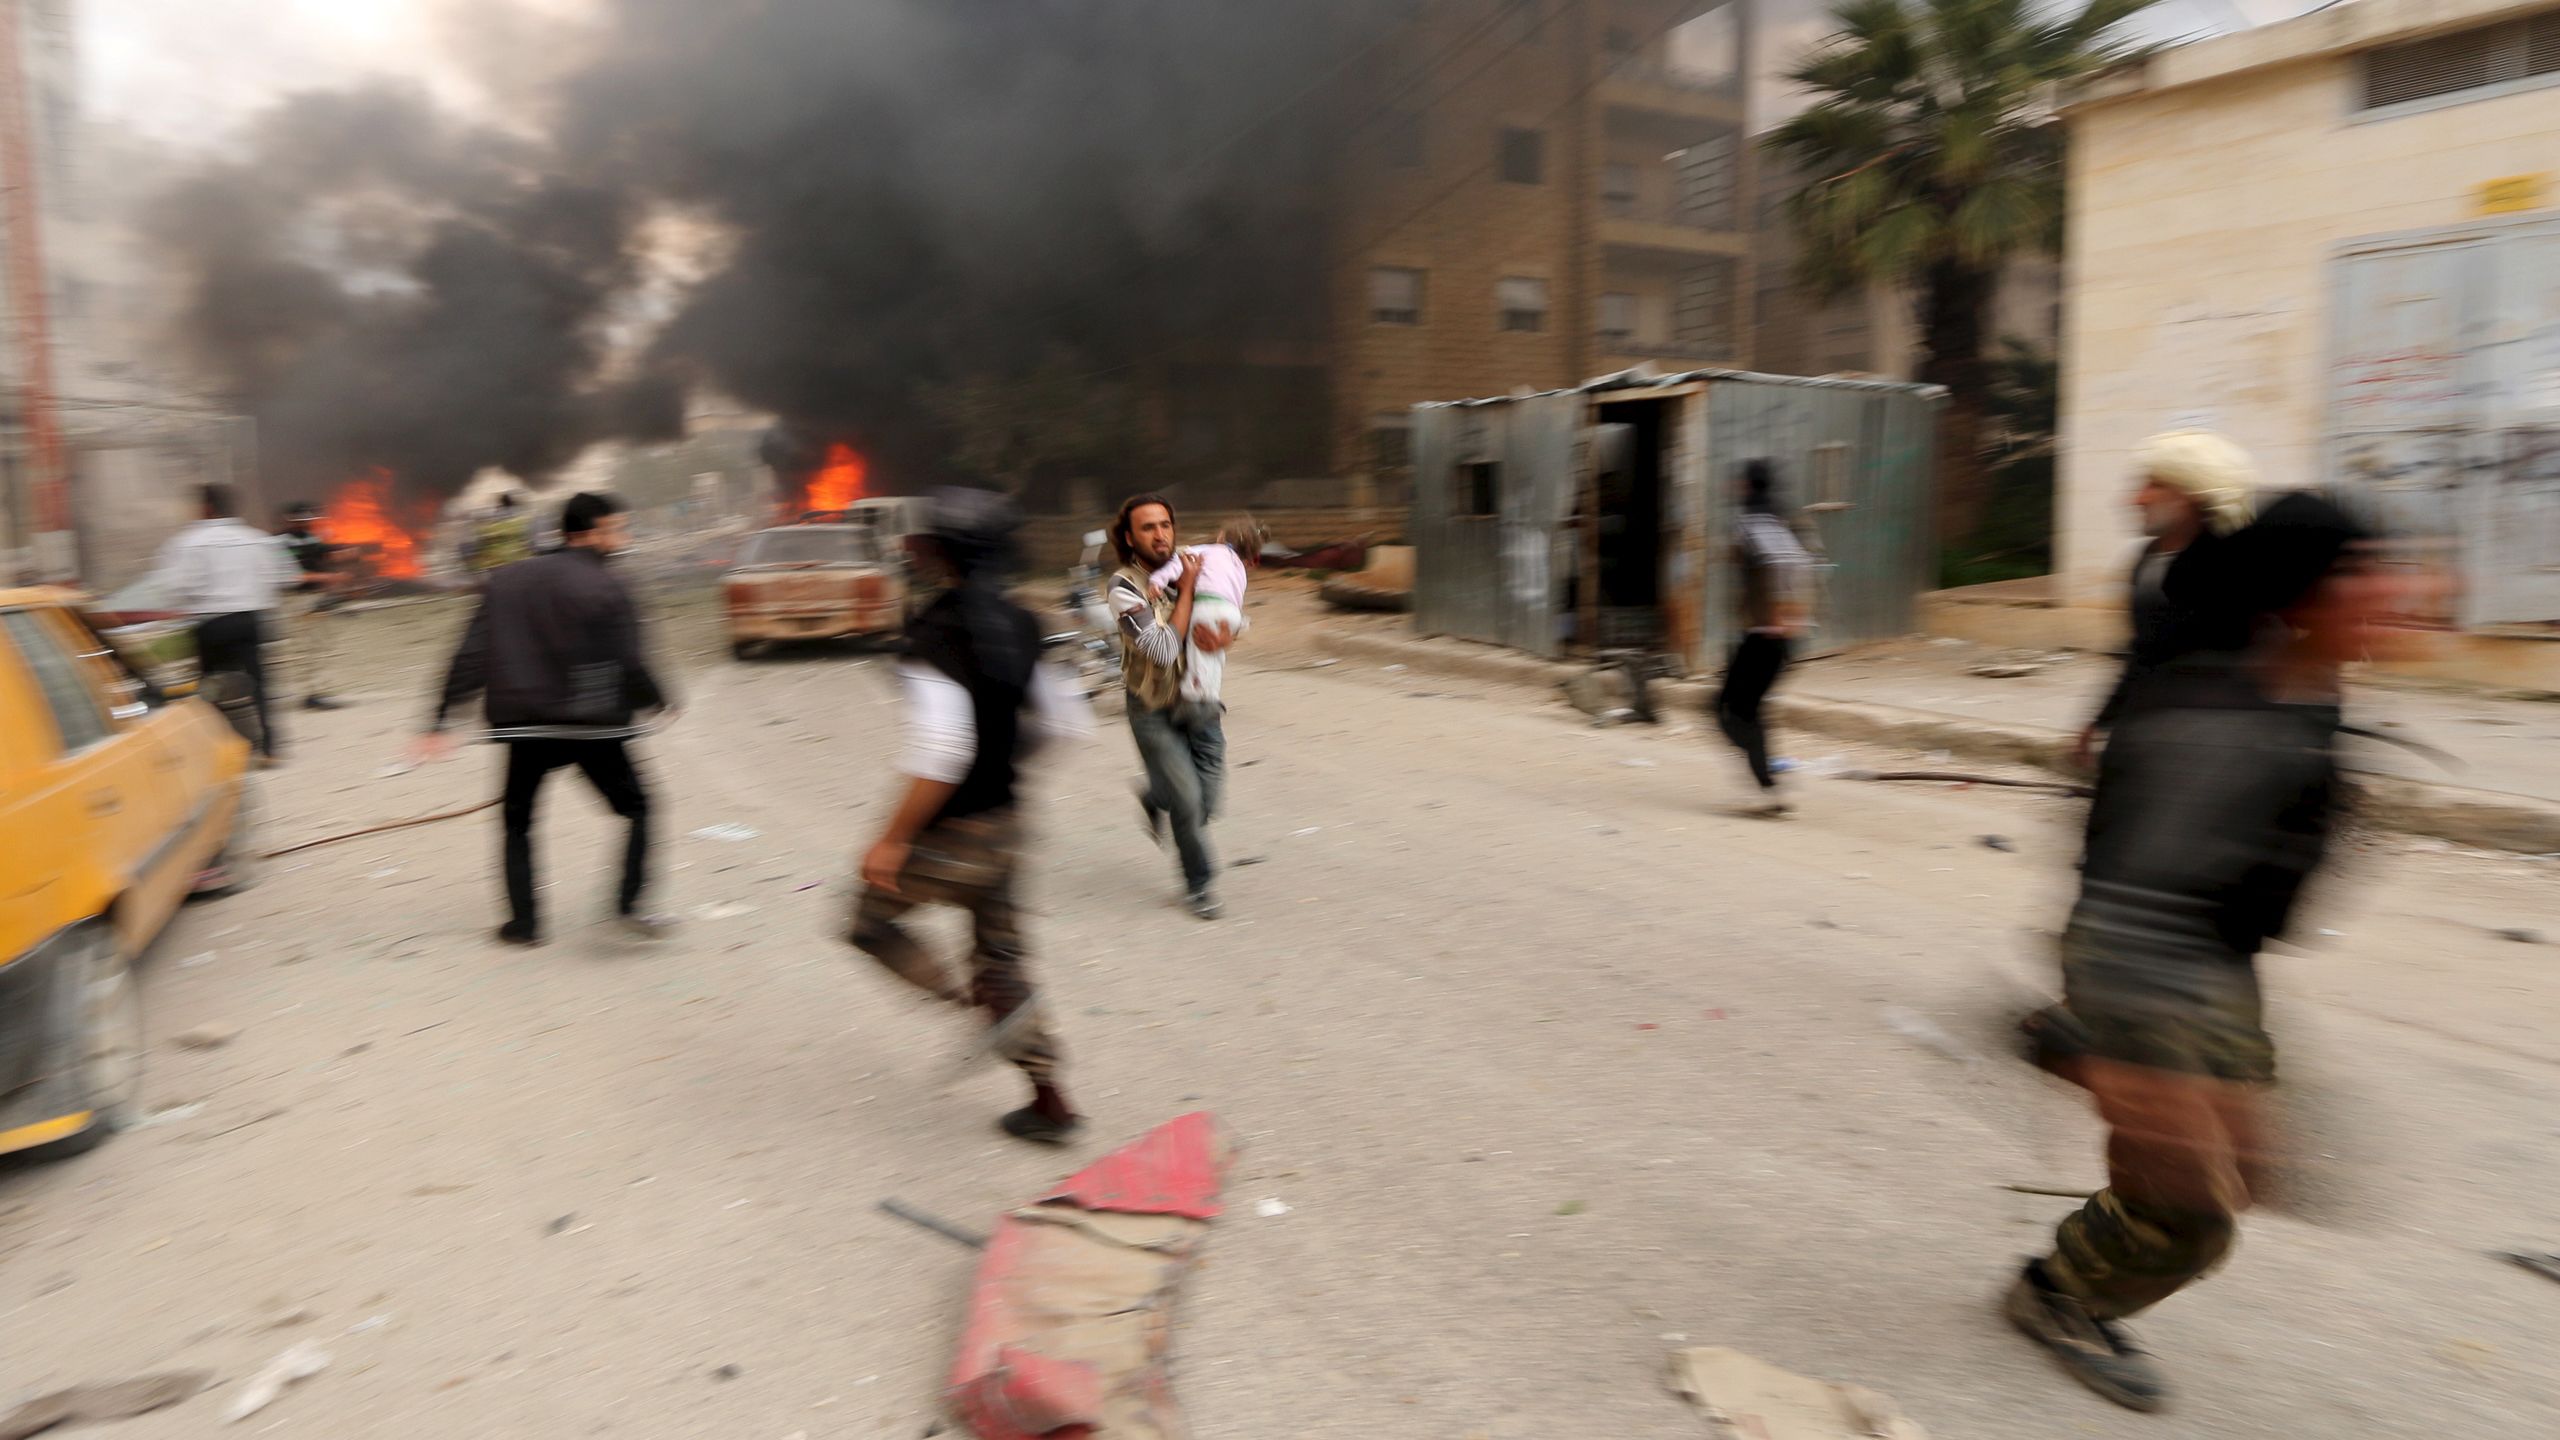 A man carrying an injured child runs from a damaged site after shelling in Idlib city.